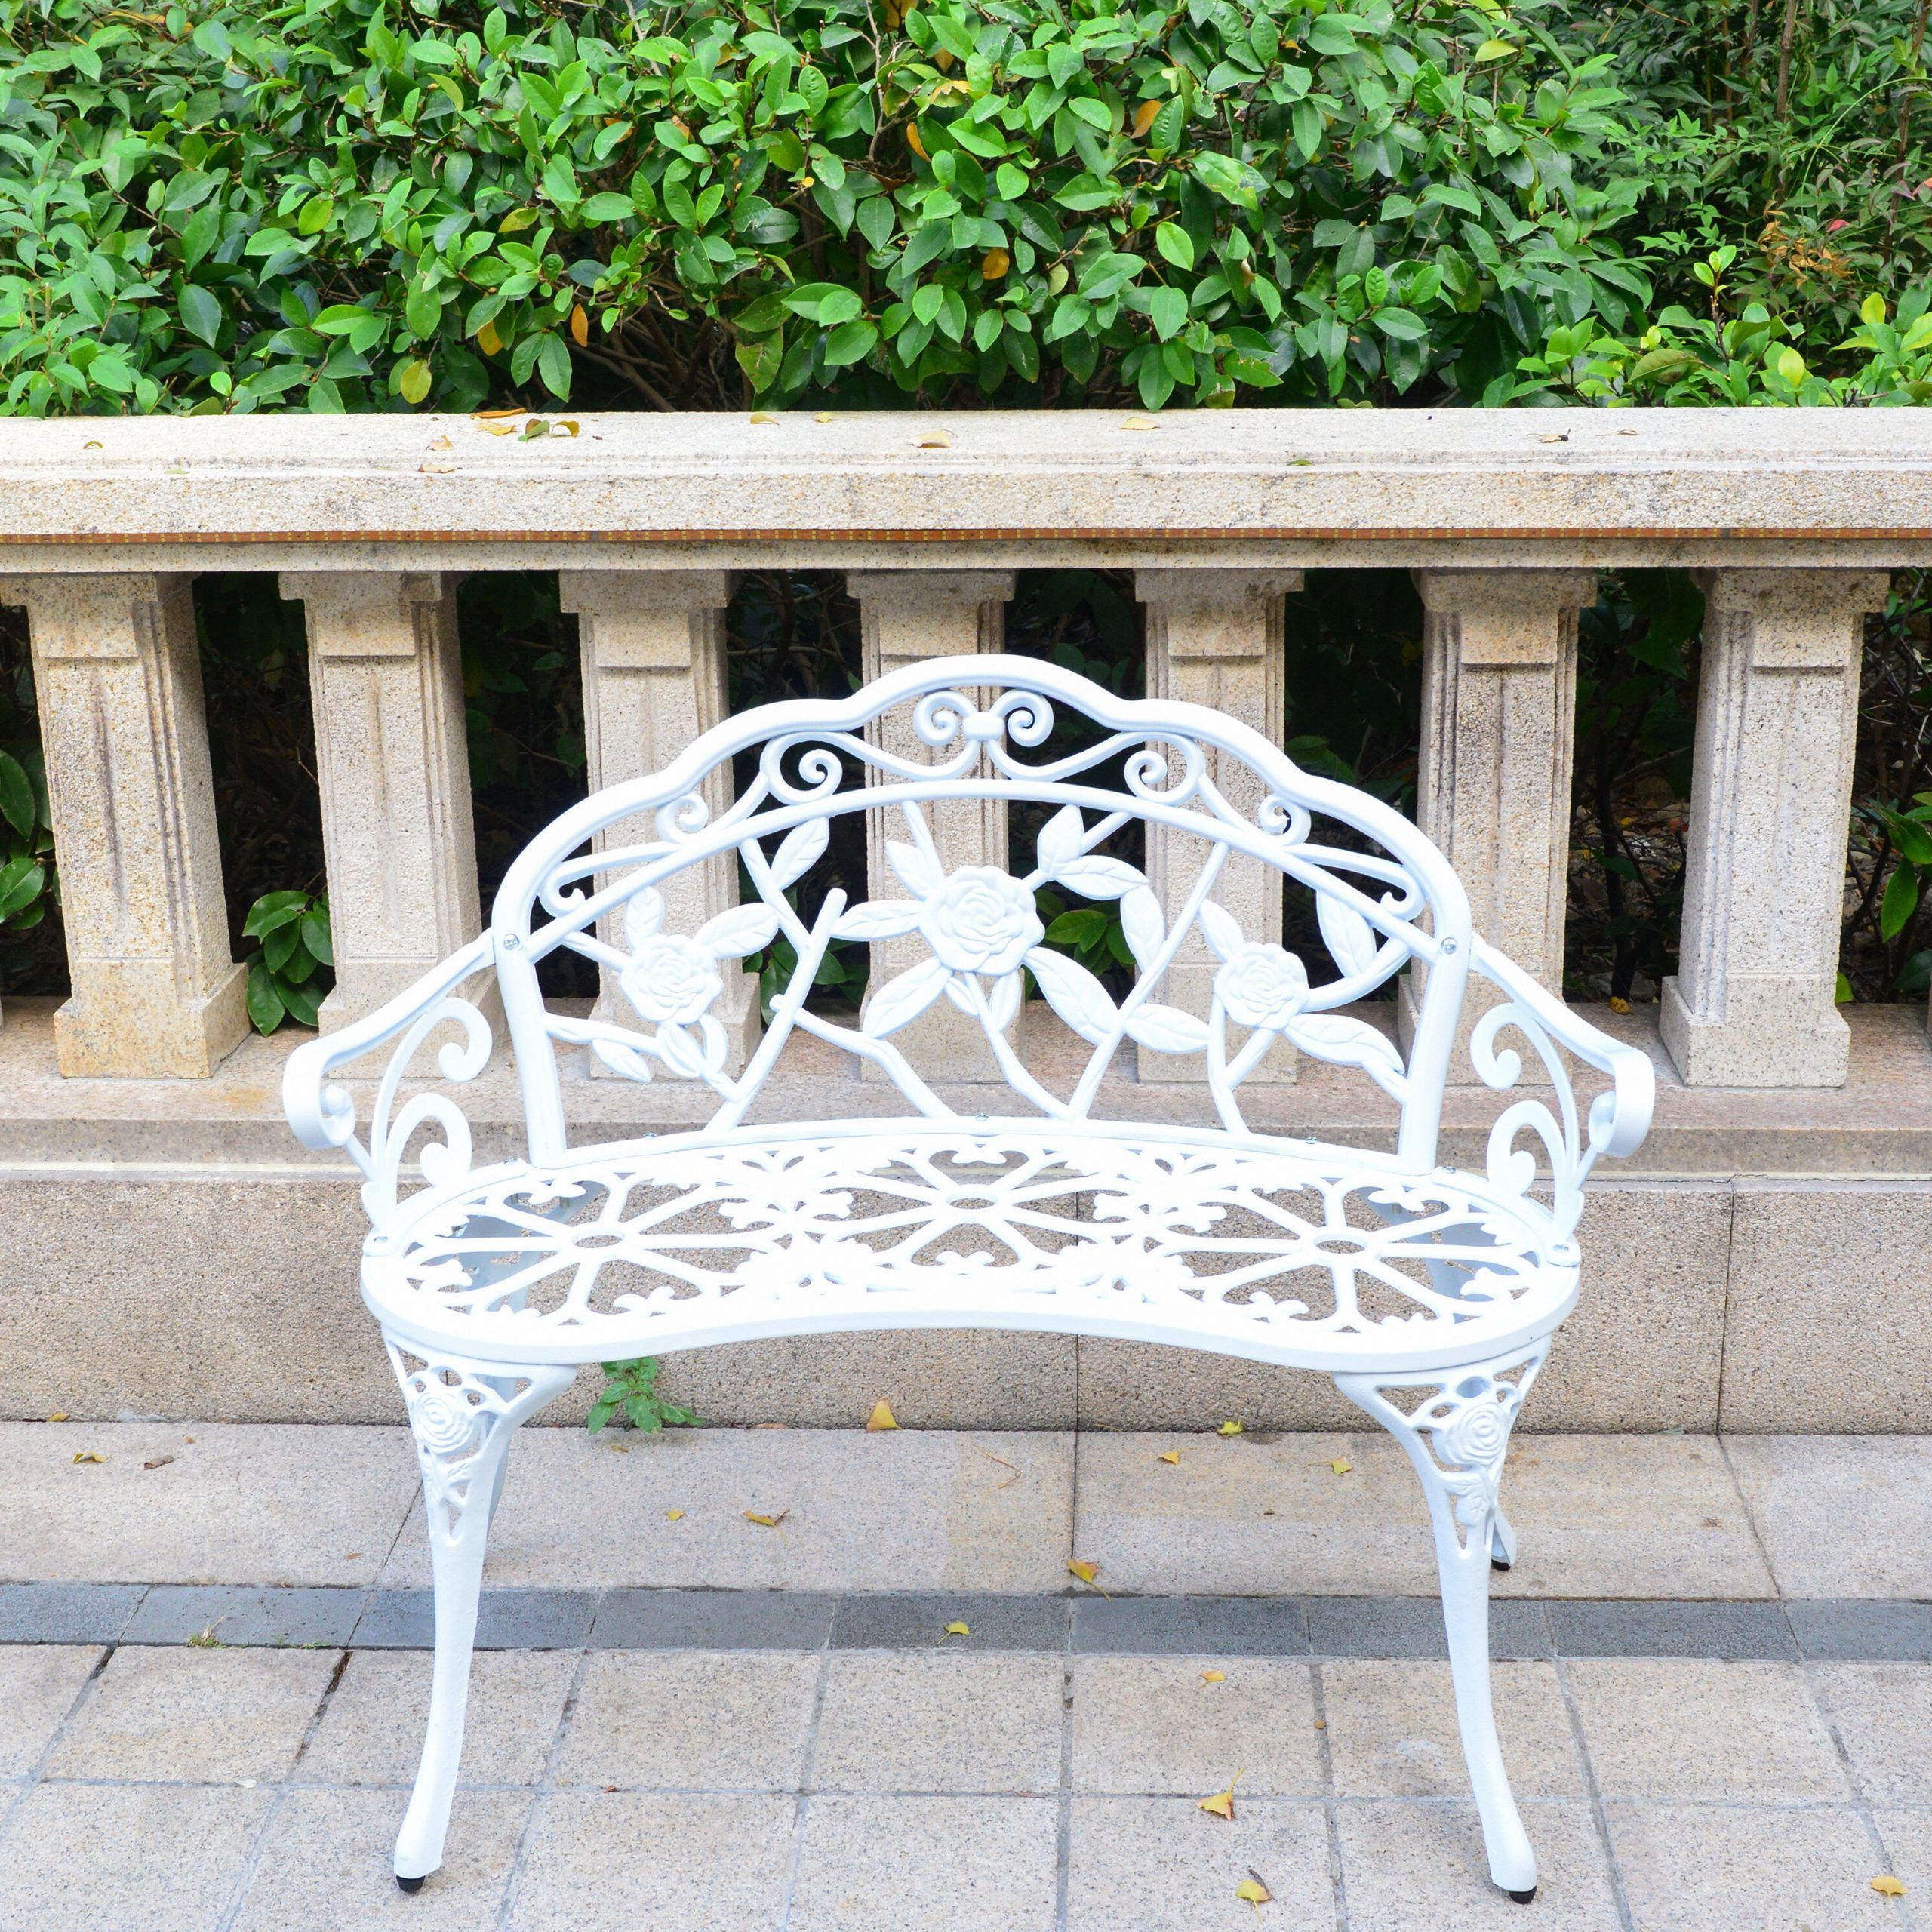 2020 Heslin Steel Park Benches In Outdoor Bench Cast Aluminum, Front Porch Benches Garden Metal Loveseat  Patio Furniture, Rose Carving And Weather Resistant  White (View 10 of 30)